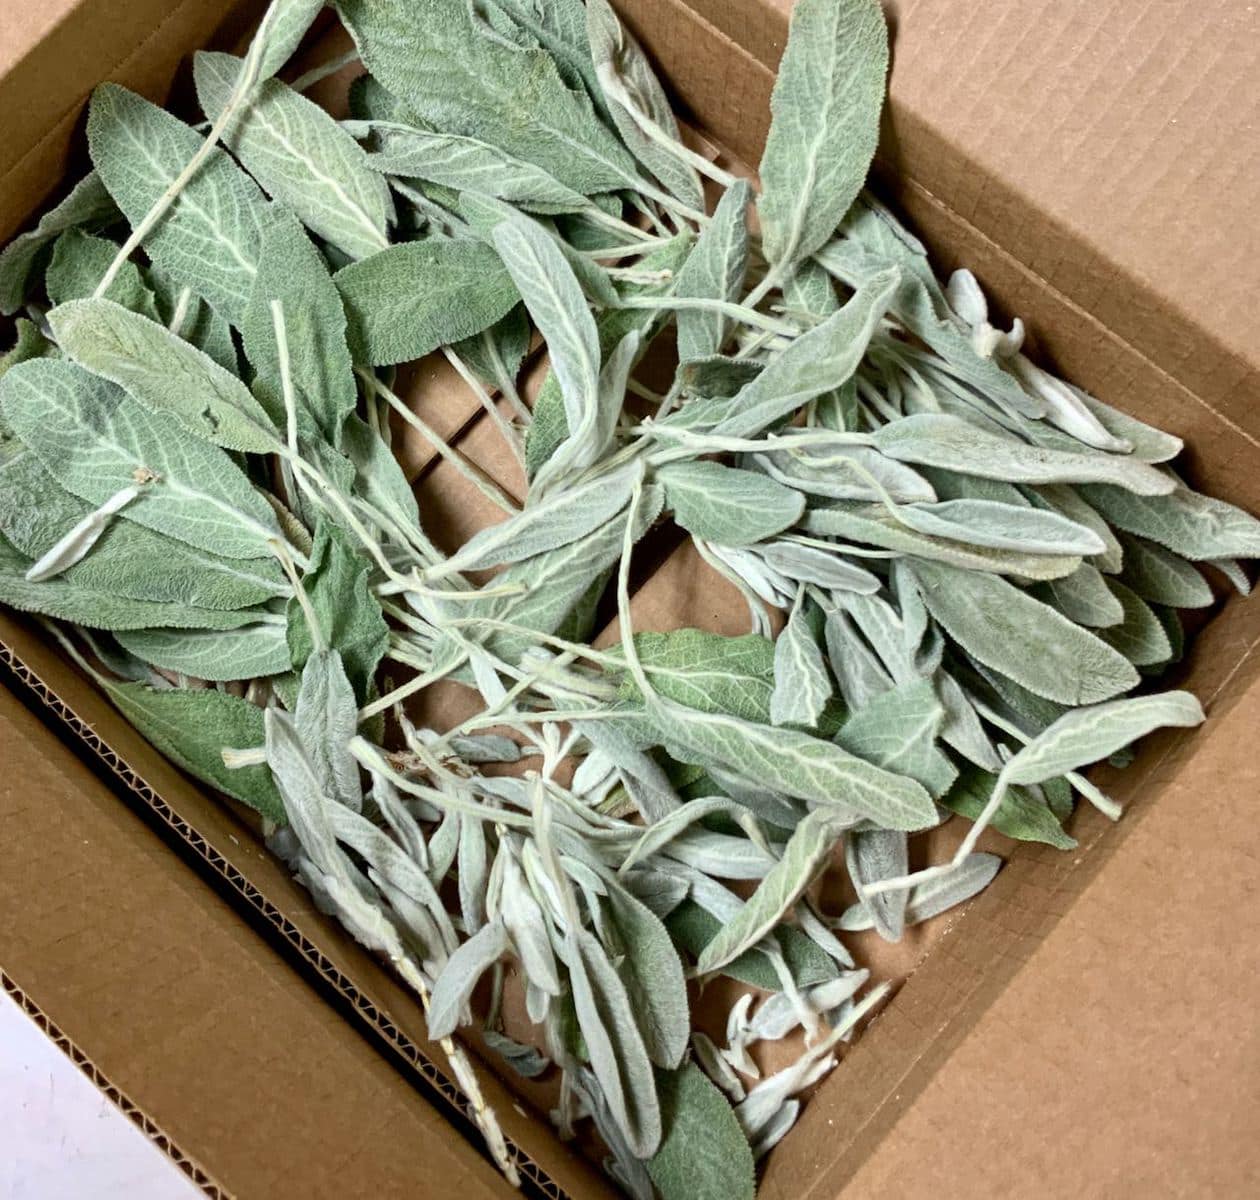 Cardboard shipping box filled with dried lambs ear